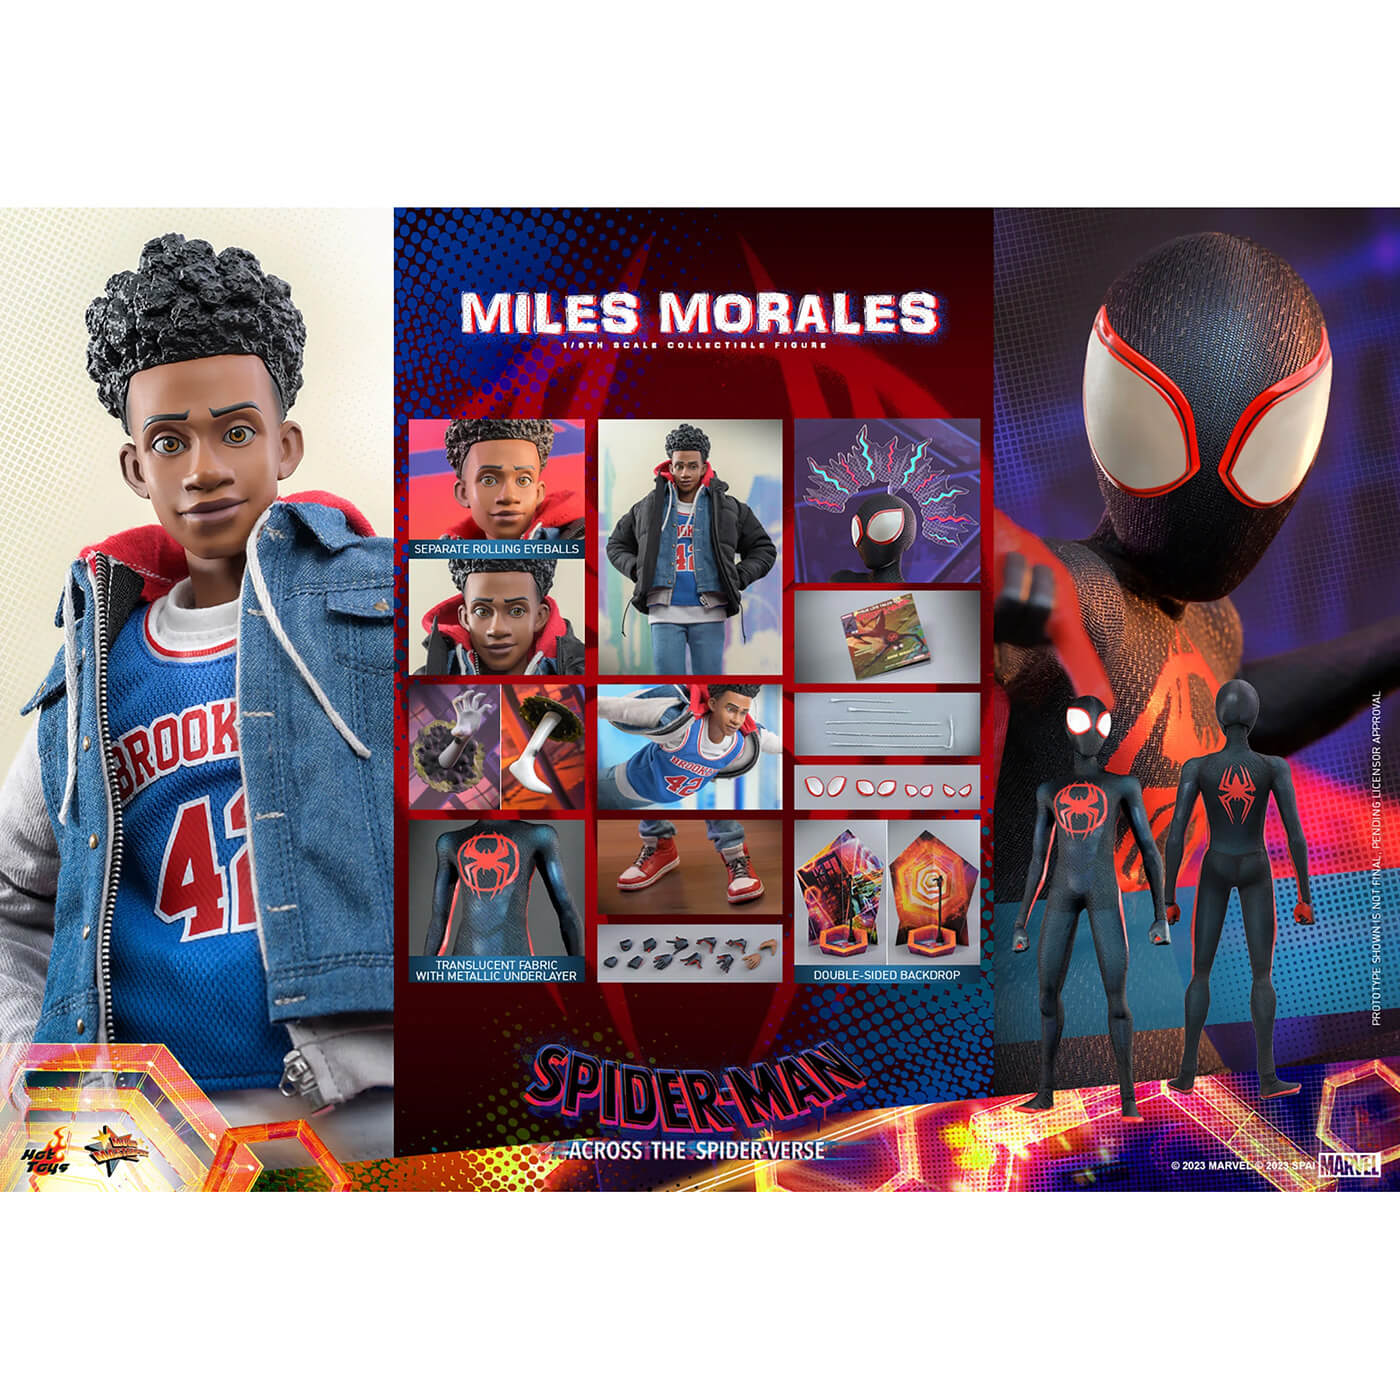 Accessory and features for the Hot Toys Miles Morales Sixth Scale Figure.